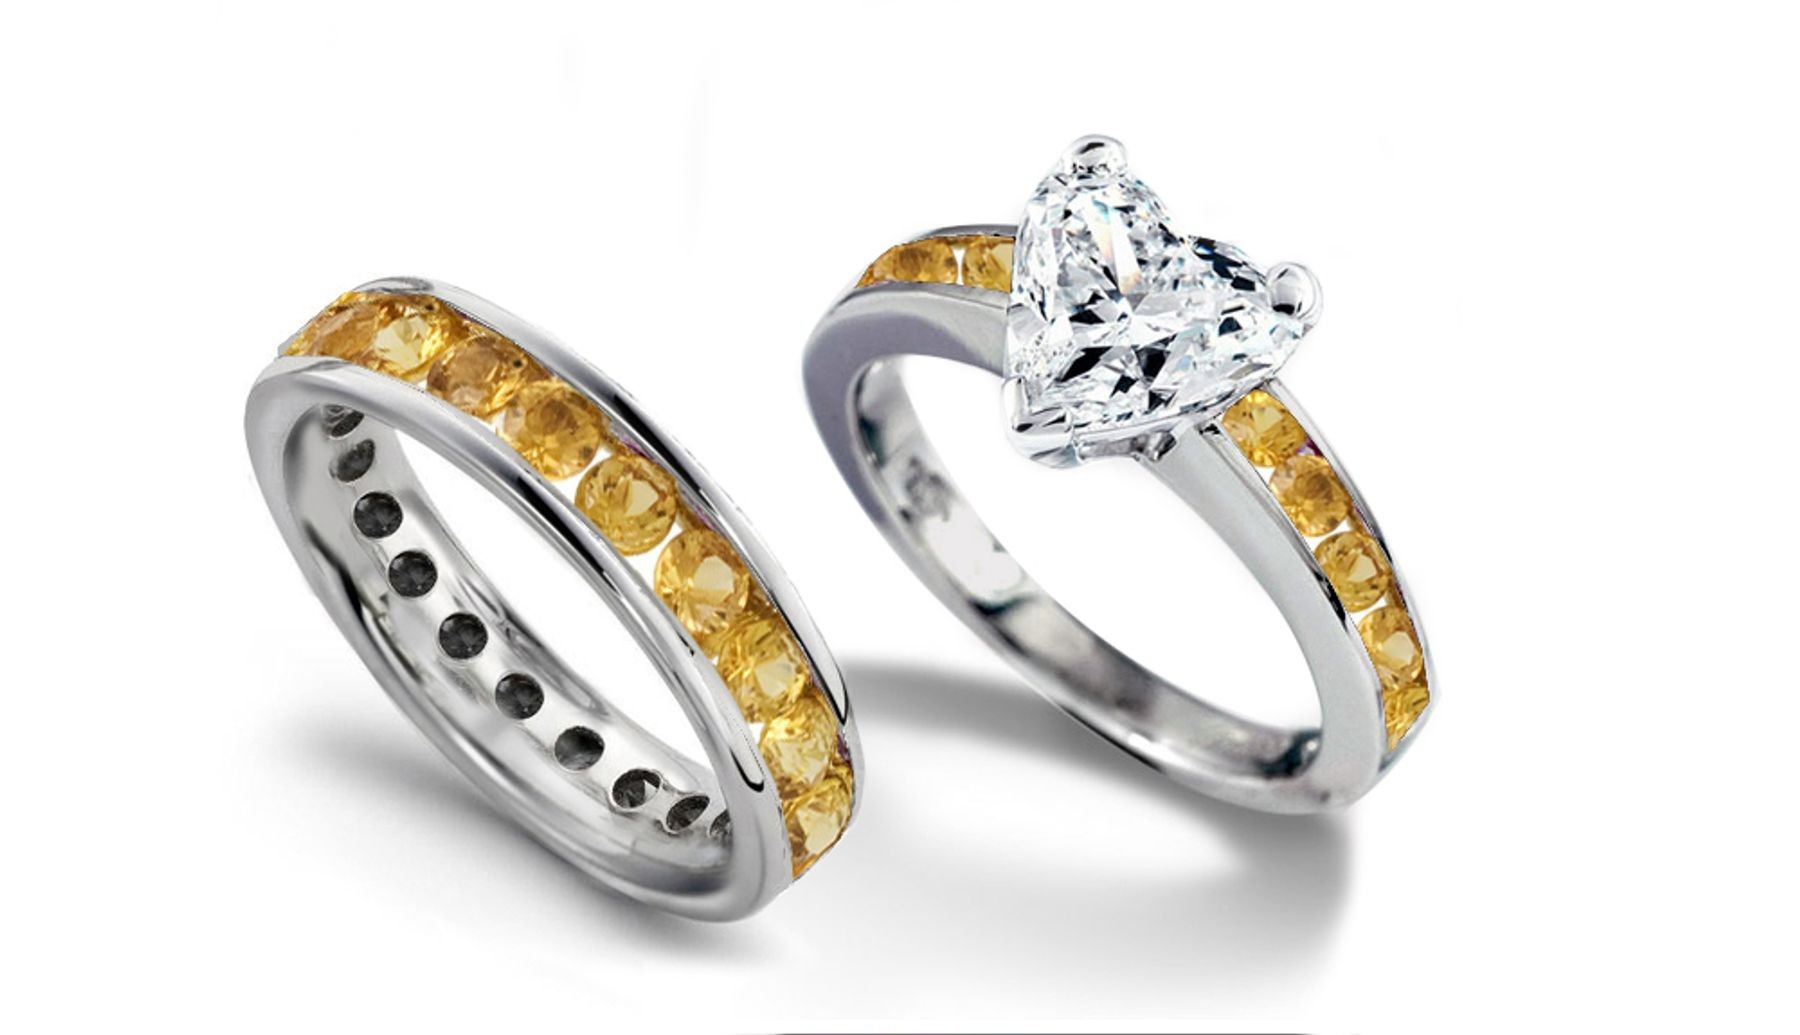 A Lot of Stones: Yellow Sapphire Wedding Engagement Rings